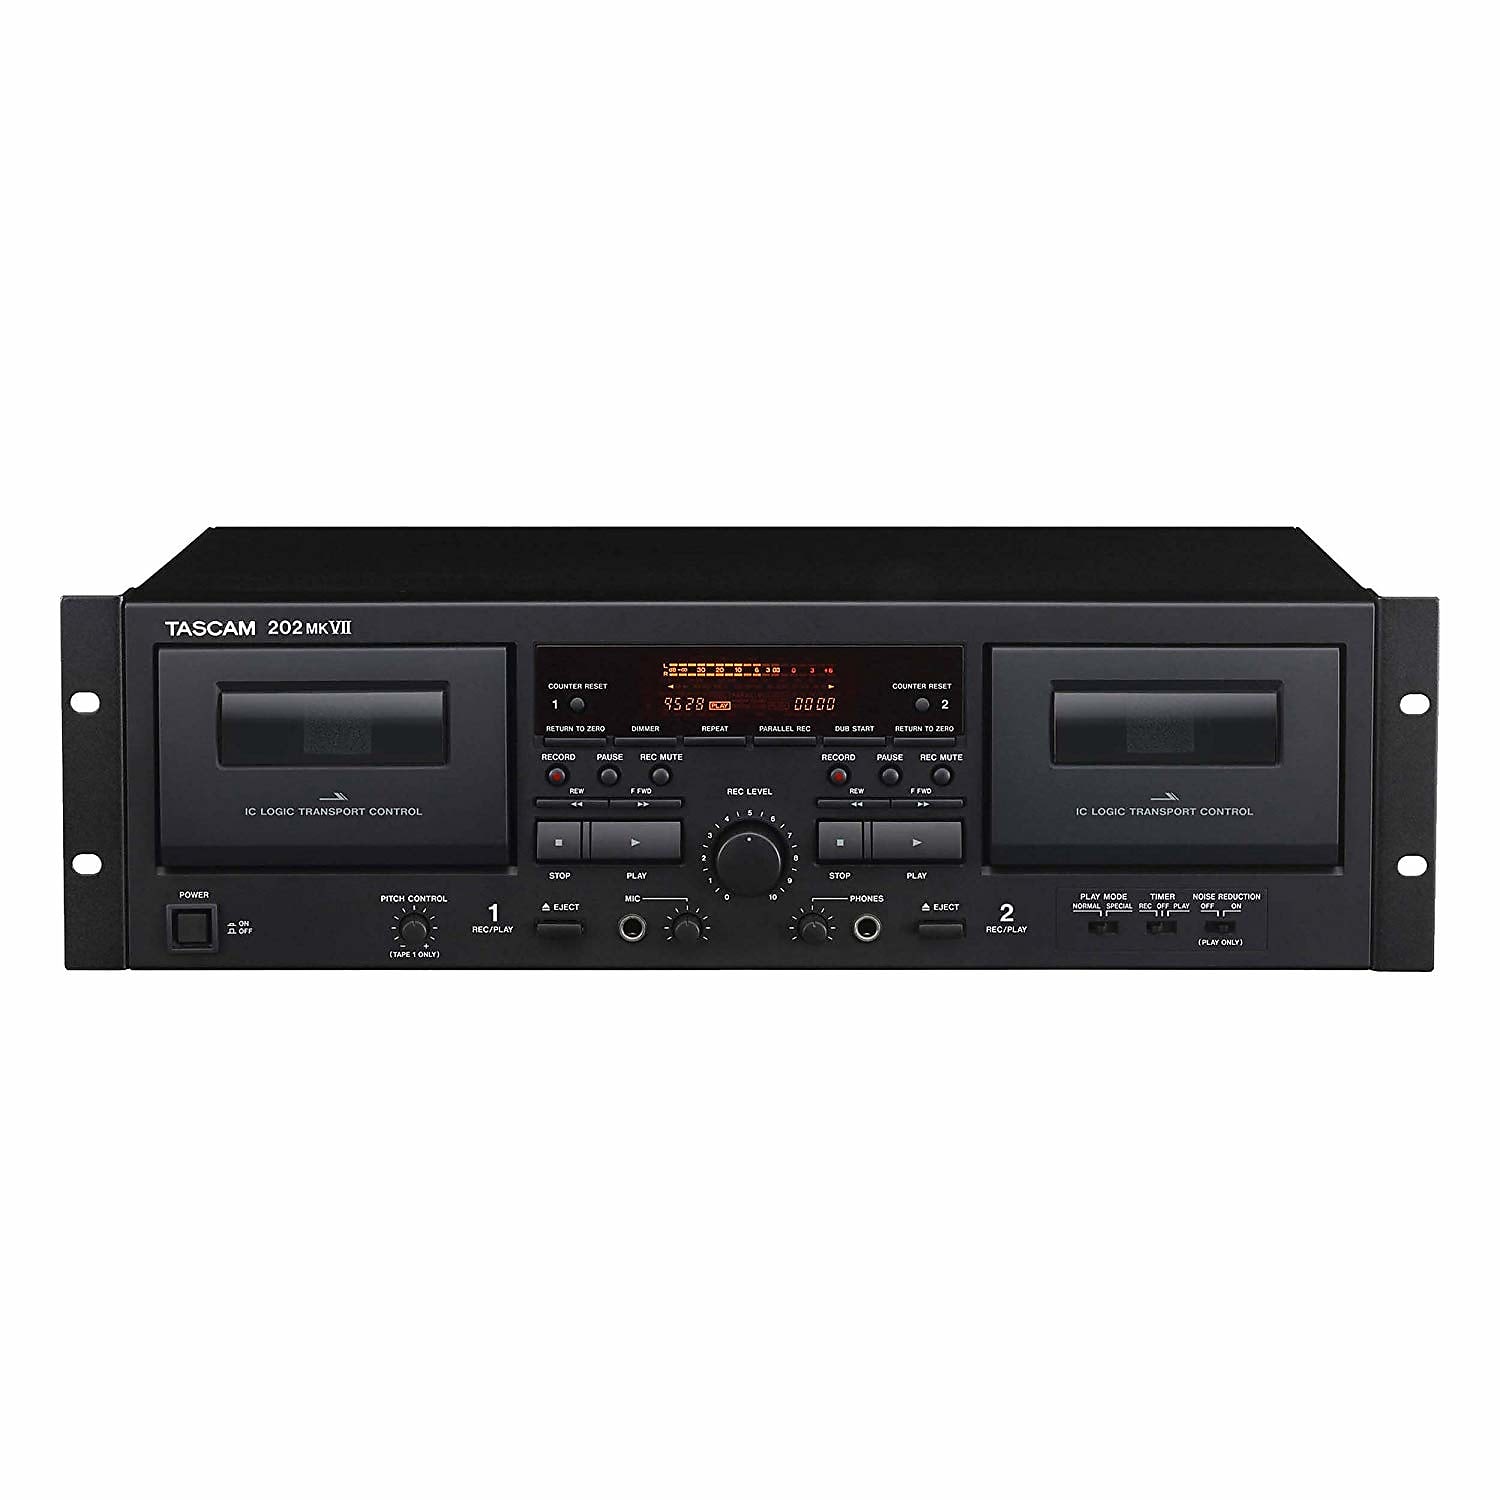 TASCAM 202 MK VII Dual Cassette Recorder with USB | Reverb